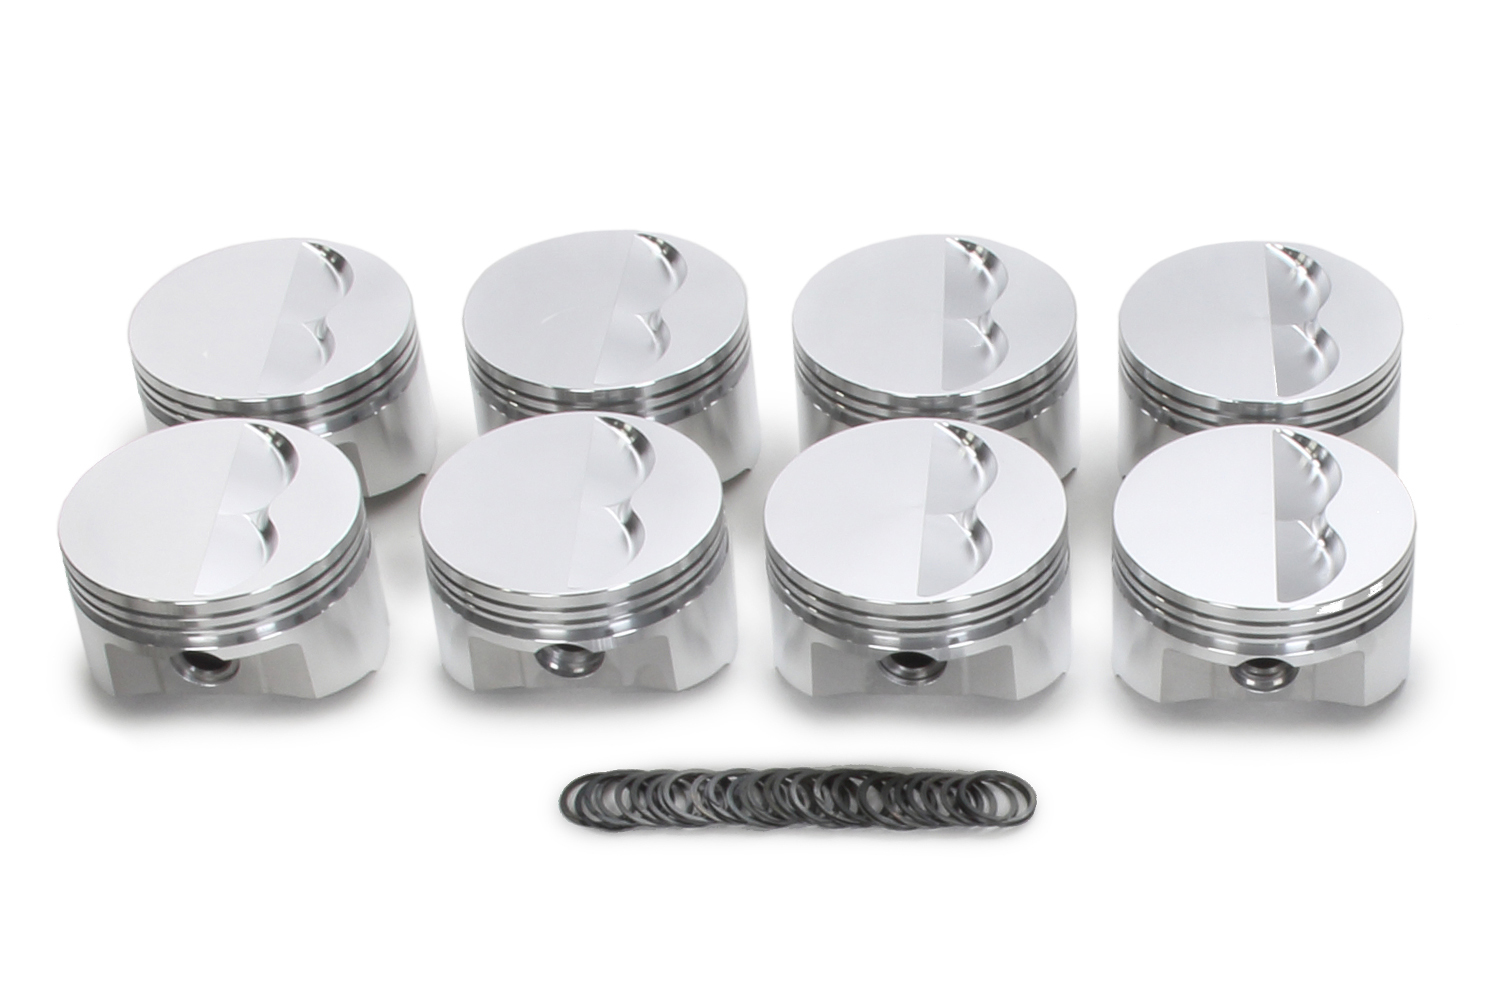 SRP Pistons 138085 Piston, 350 Flat Top, Forged, 4.030 in Bore, 1/16 x 1/16 x 3/16 in Ring Grooves, Minus 5.00 cc, Small Block Chevy, Set of 8